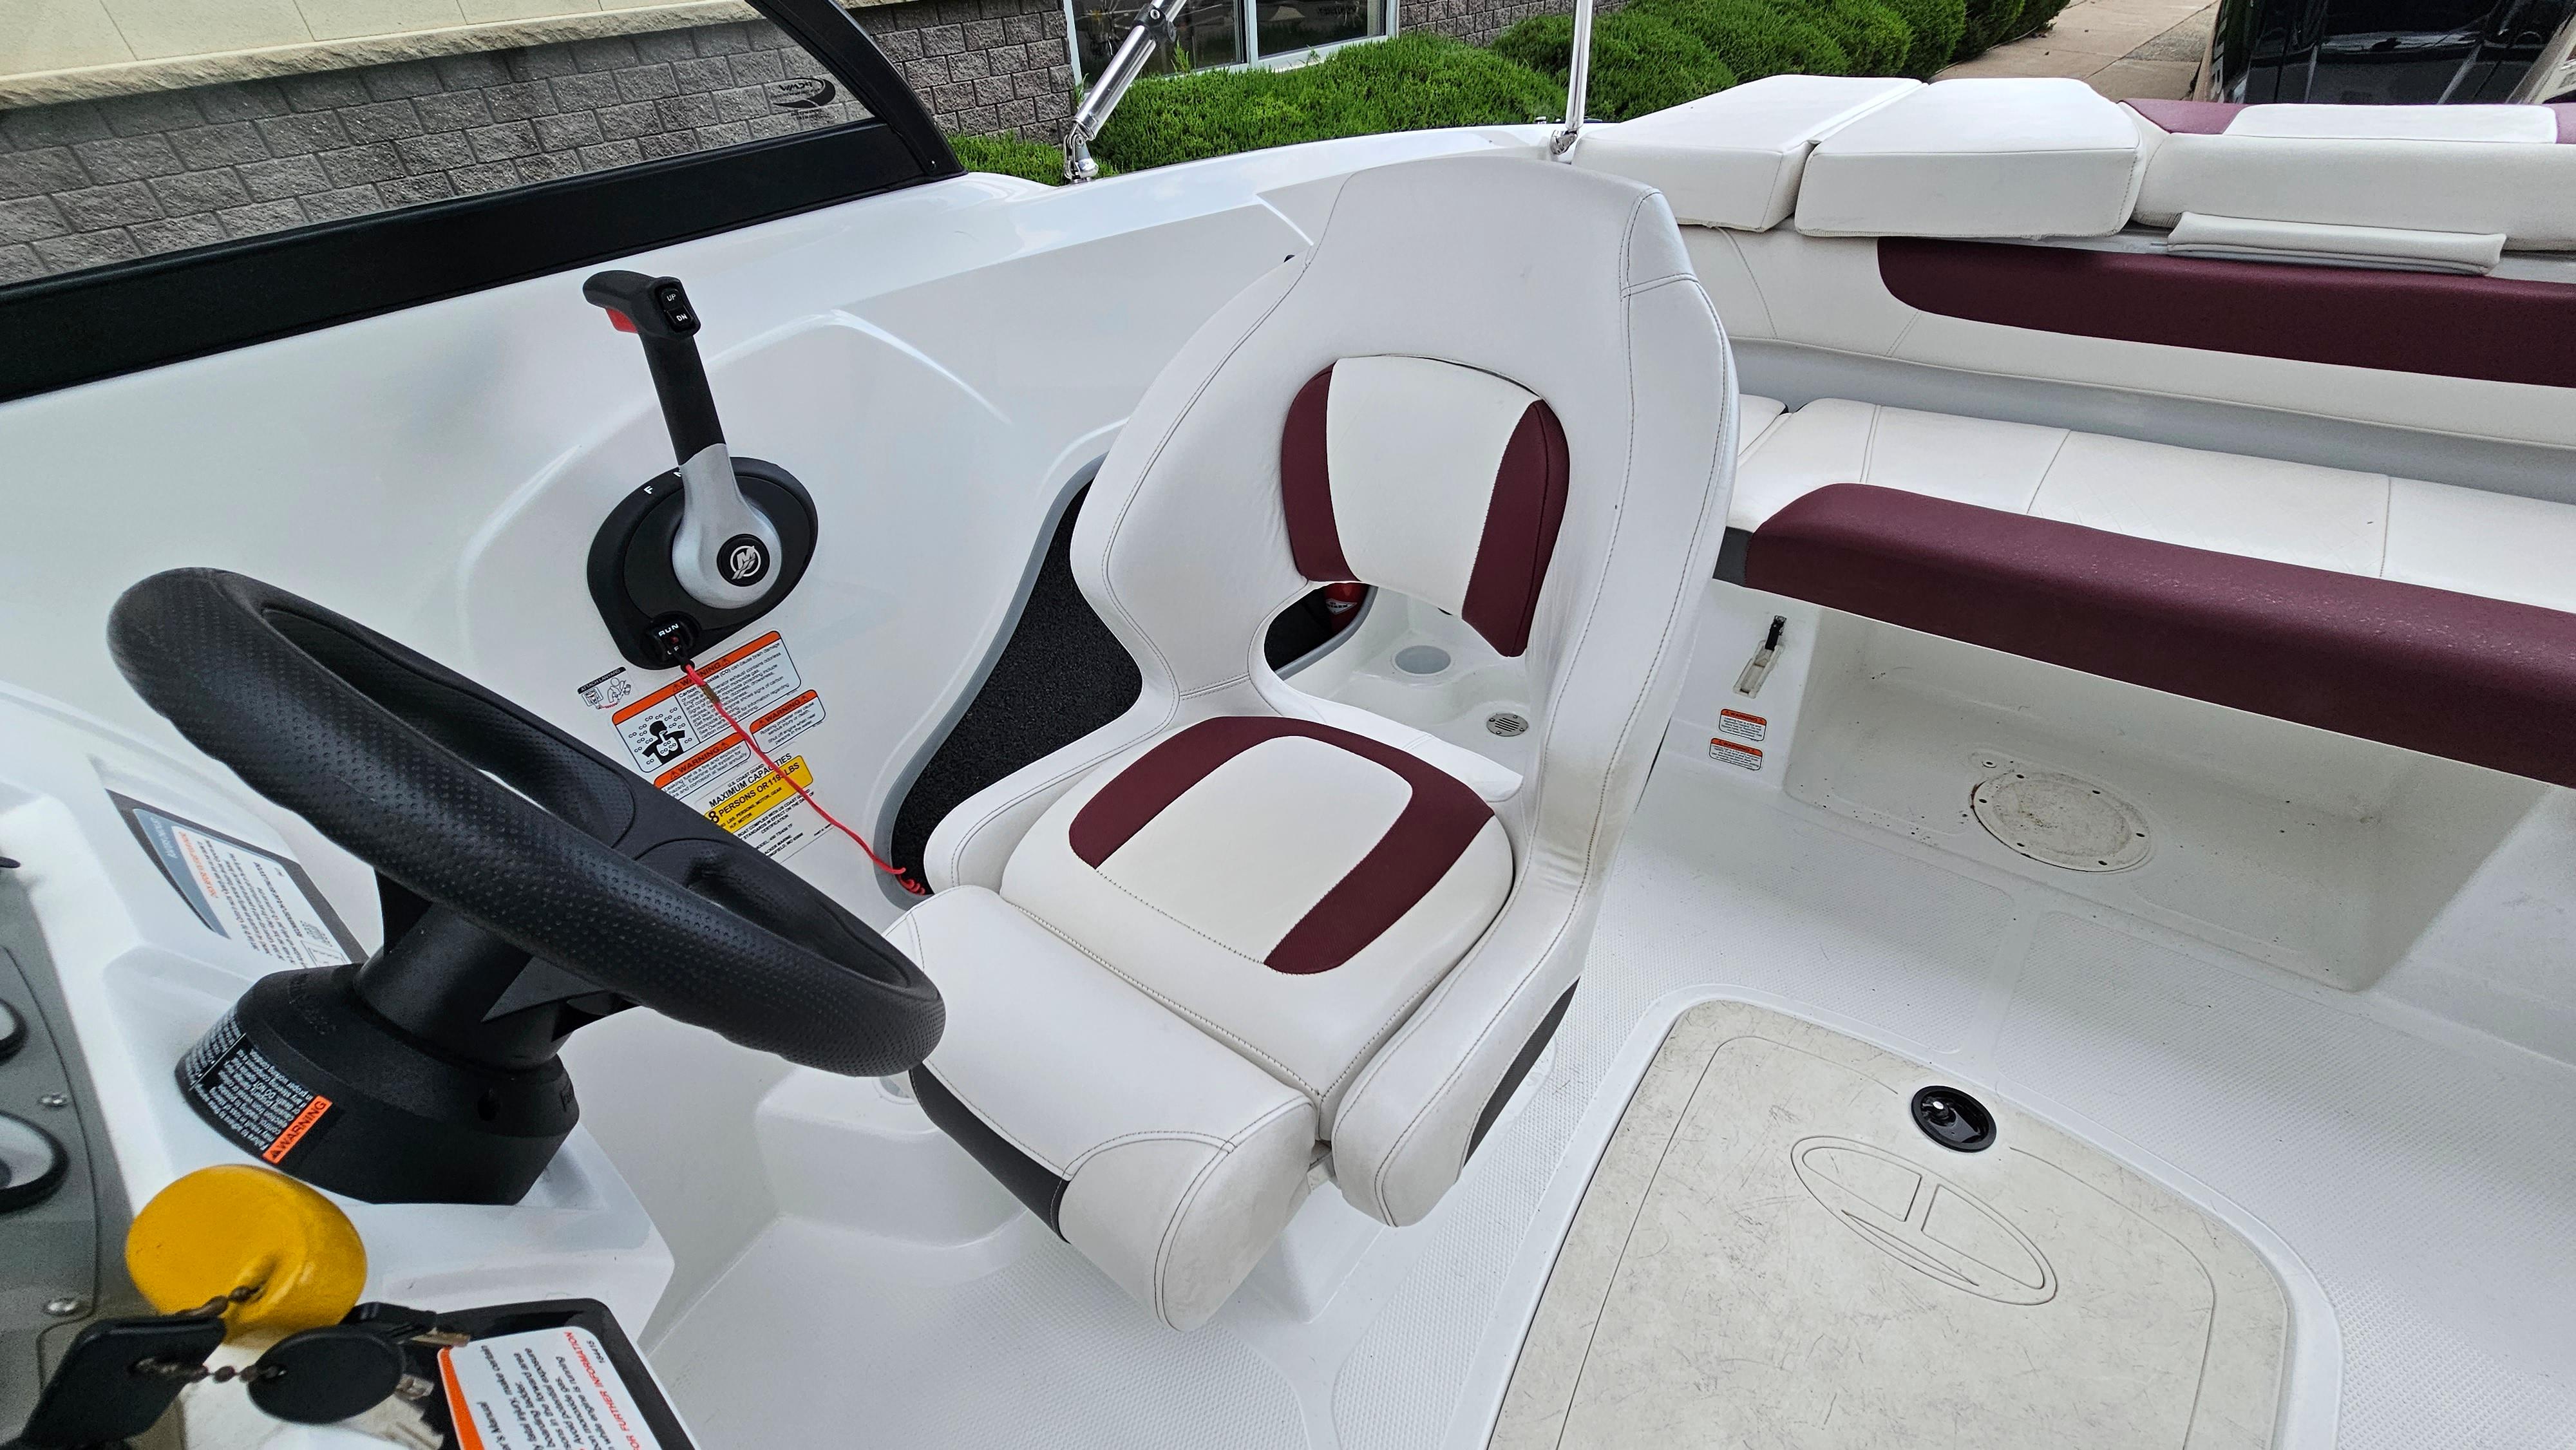 2018 Tahoe 450 TF Bowrider for sale - YachtWorld